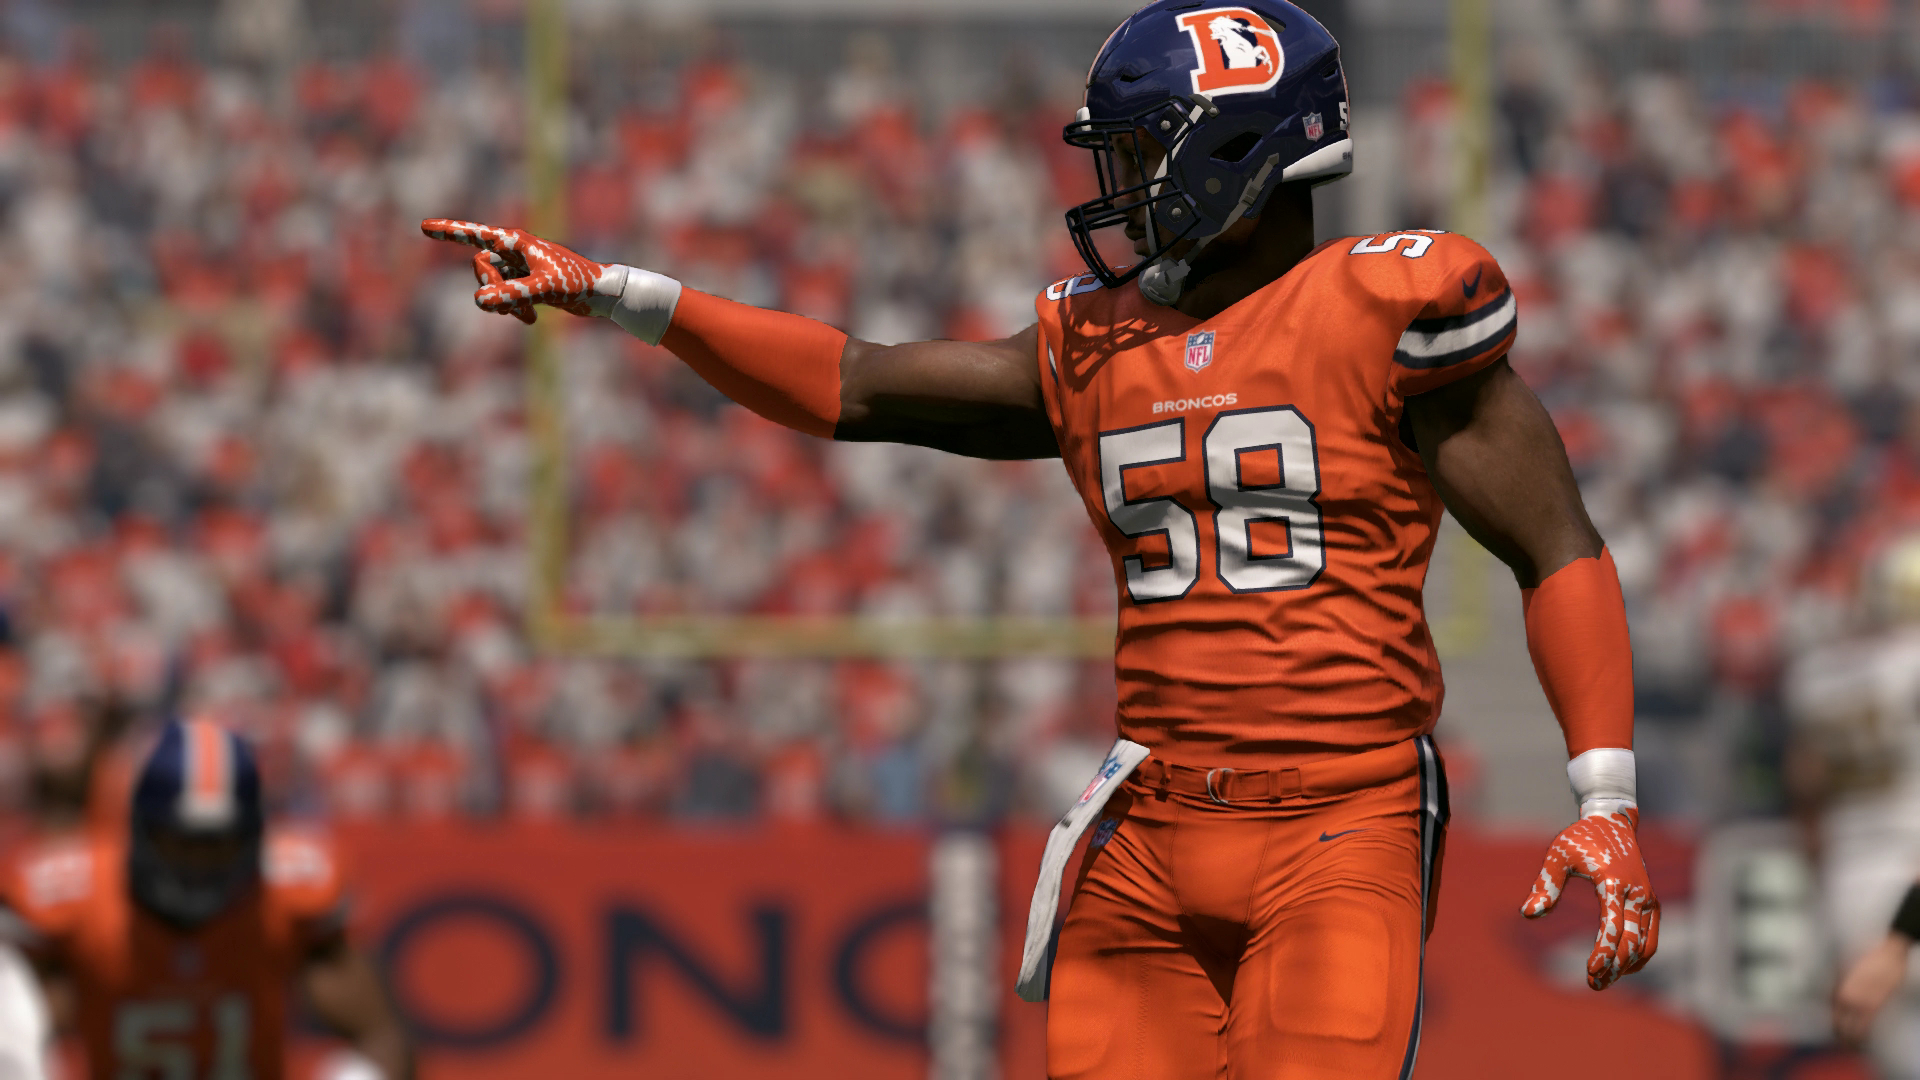 All the color rush uniforms have been added to madden nfl